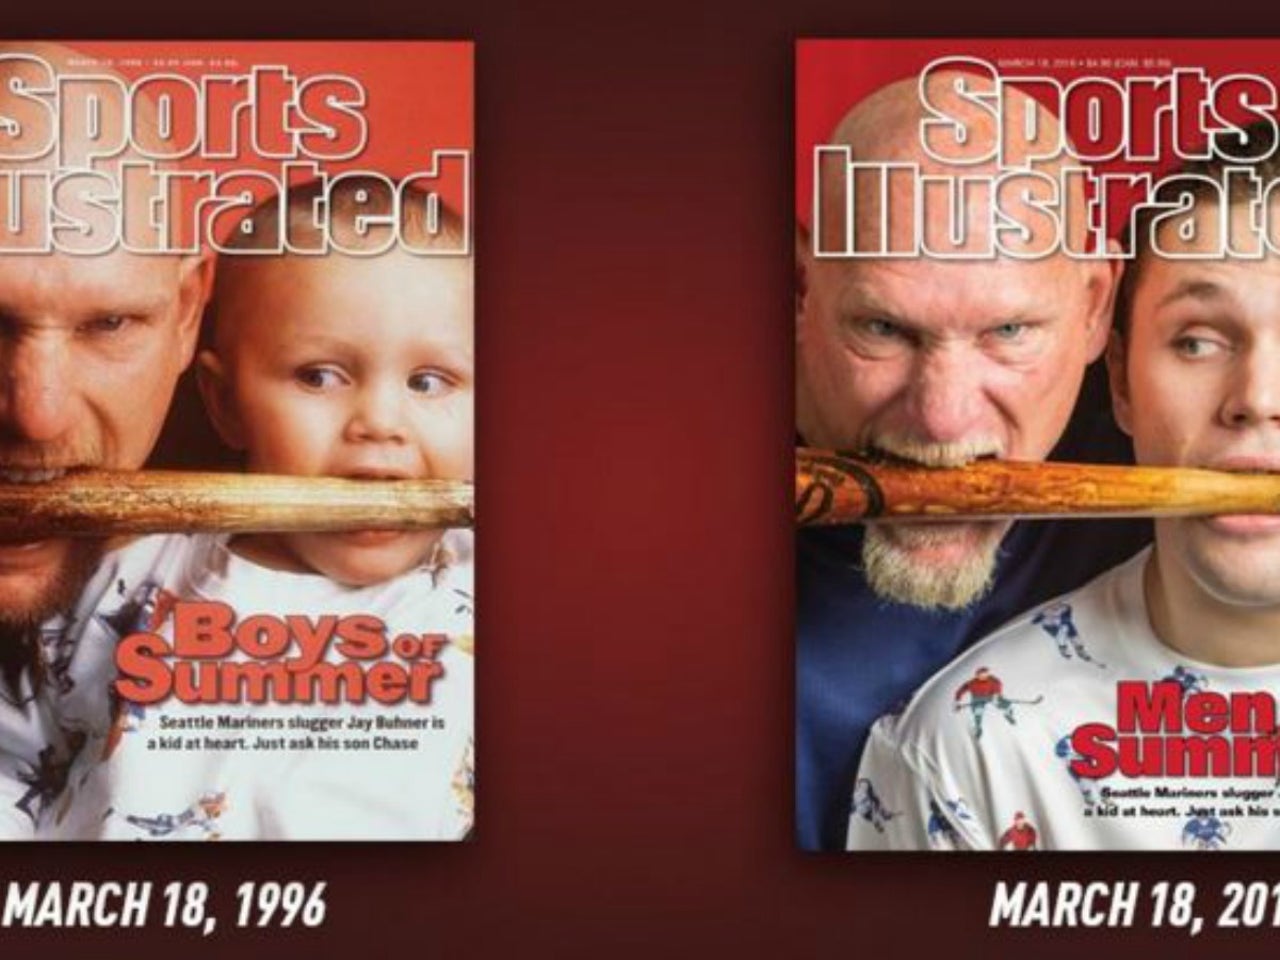 Jay Buhner recreates iconic photo with his infant son 20 years later